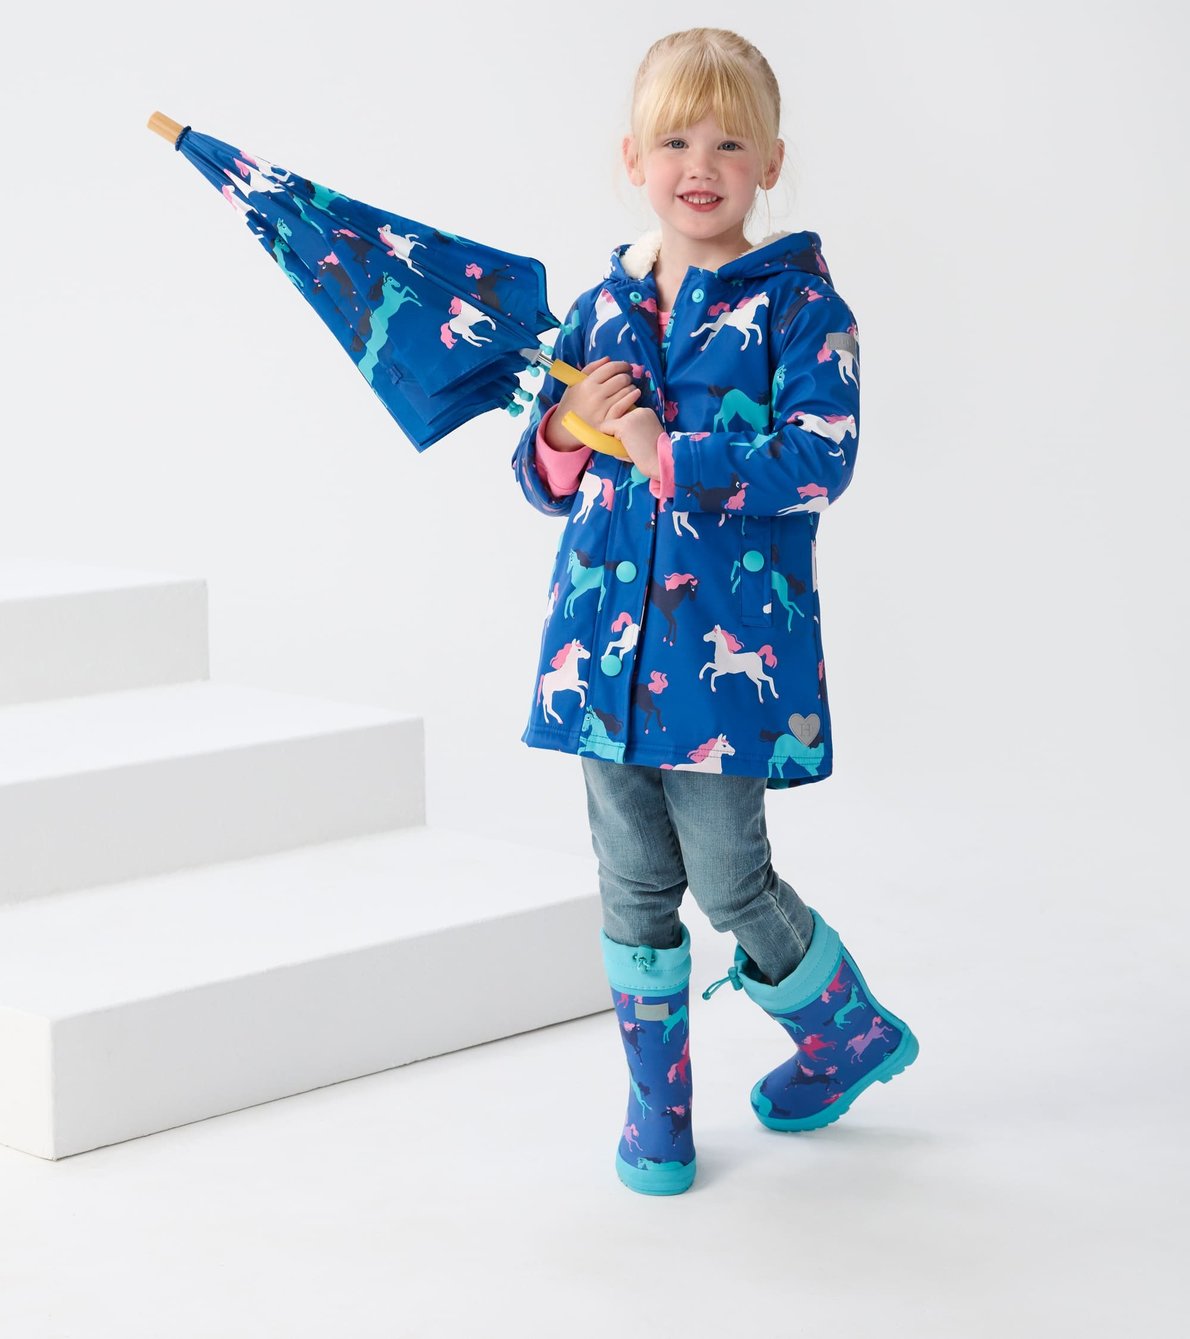 View larger image of Prancing Horses Sherpa Lined Kids Rain Boots